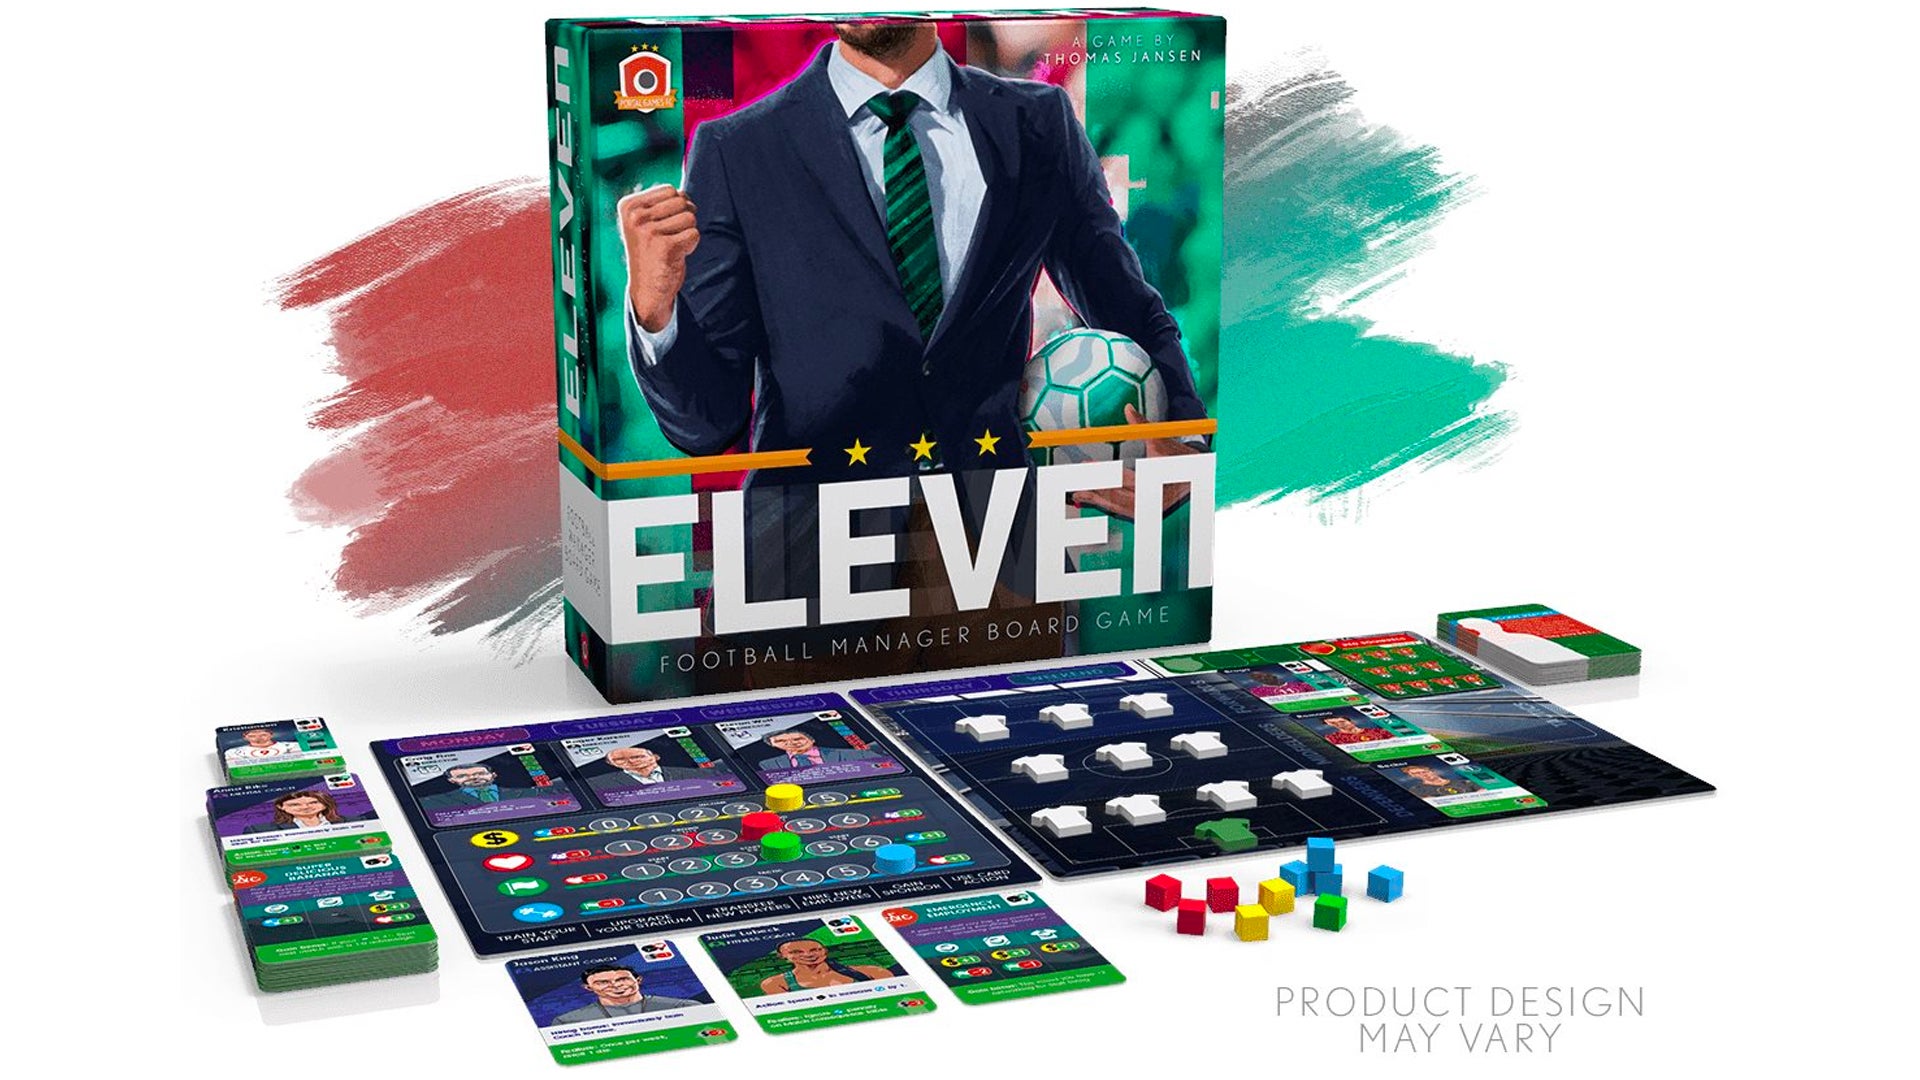 Image for Eleven is Football Manager as a board game, crowdfunding this autumn